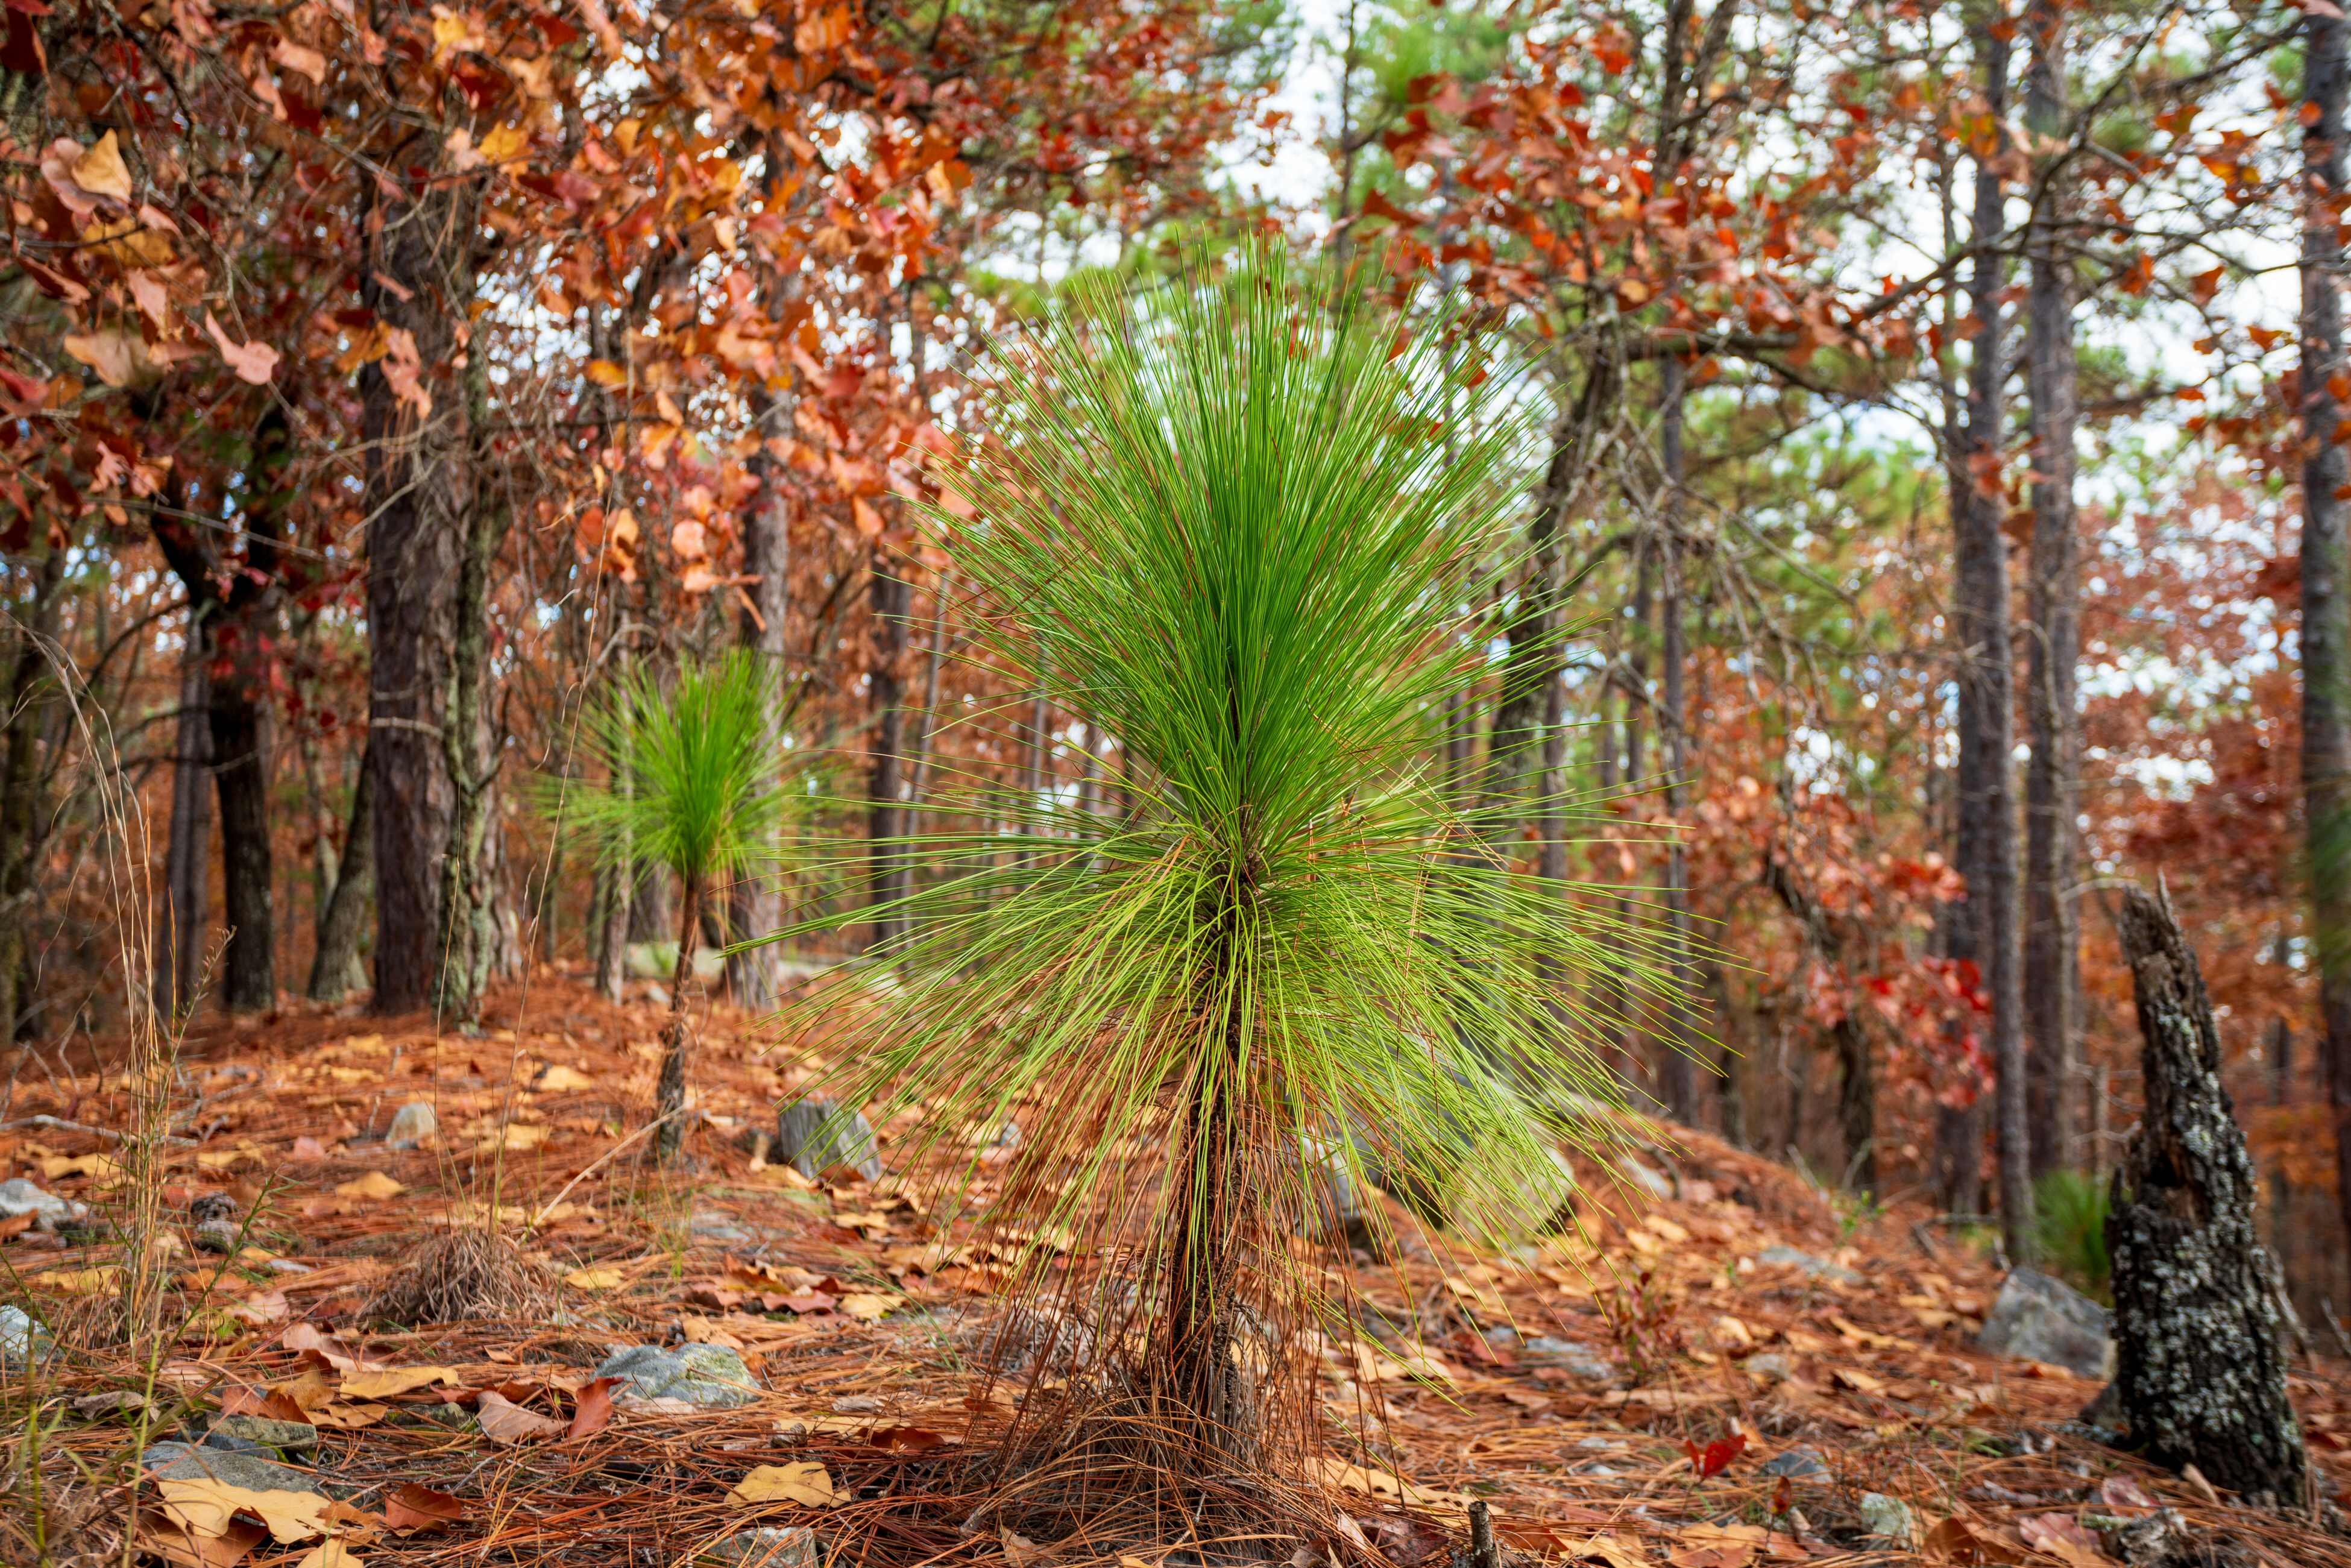 There  are 150-200 acres of longleaf pine